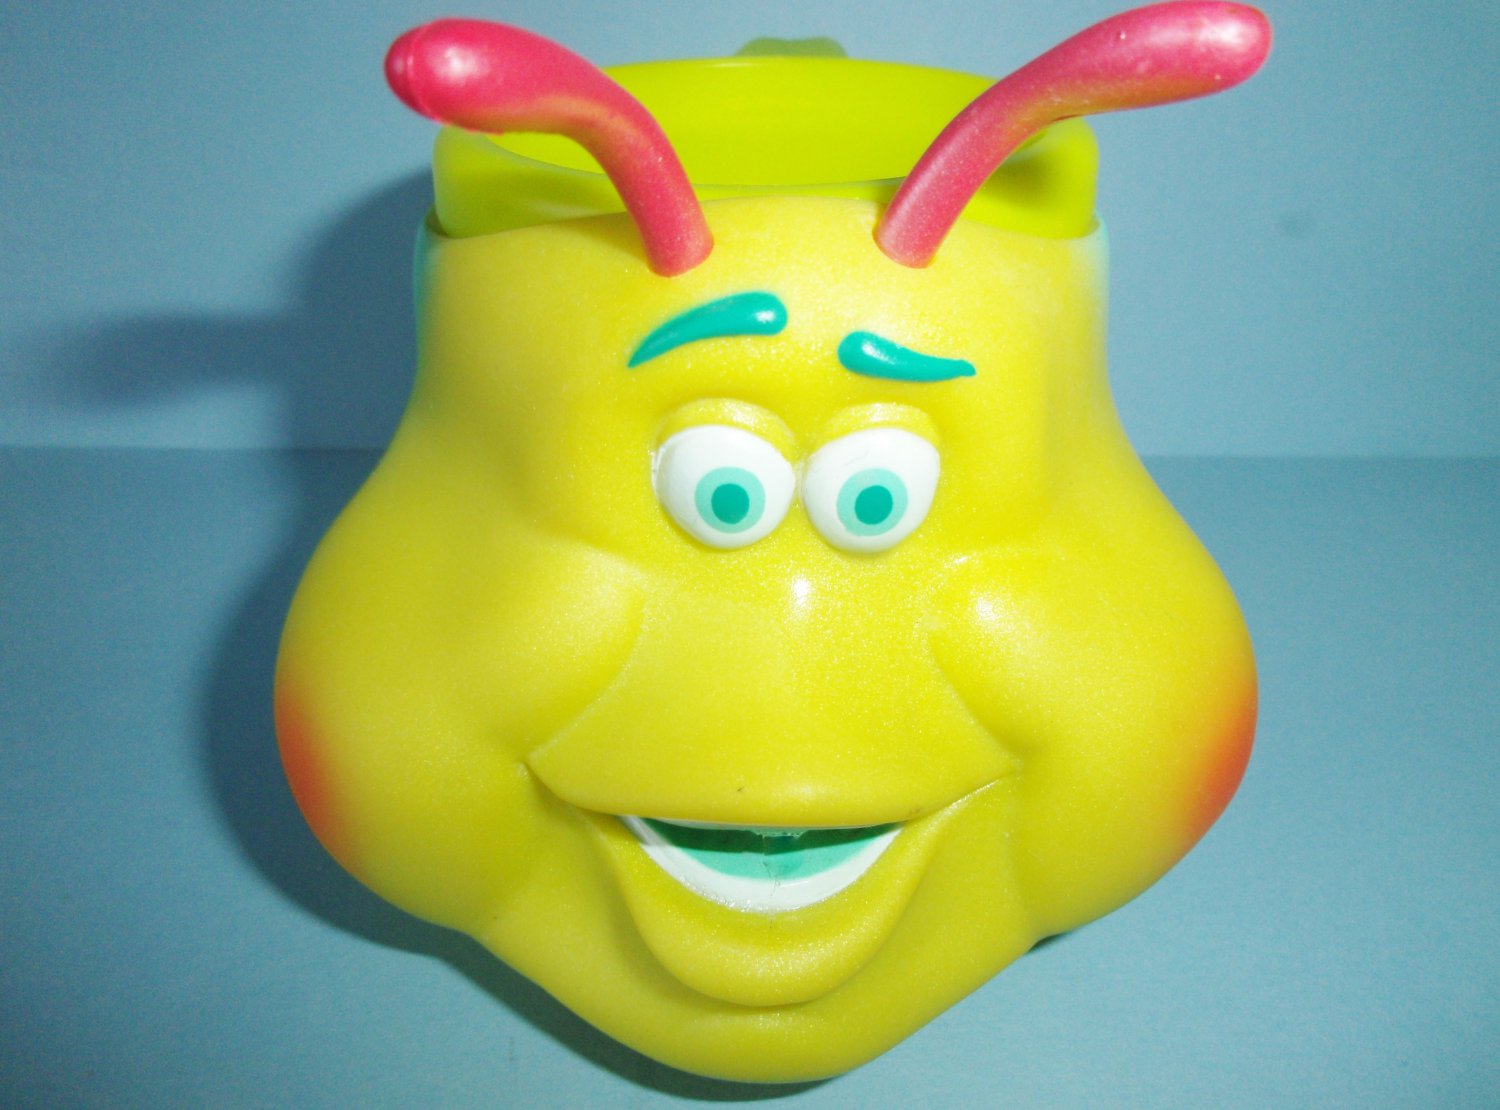 Disney A Bug's Life Heimlich the Caterpillar Mug Figural Plastic Cup by Applause